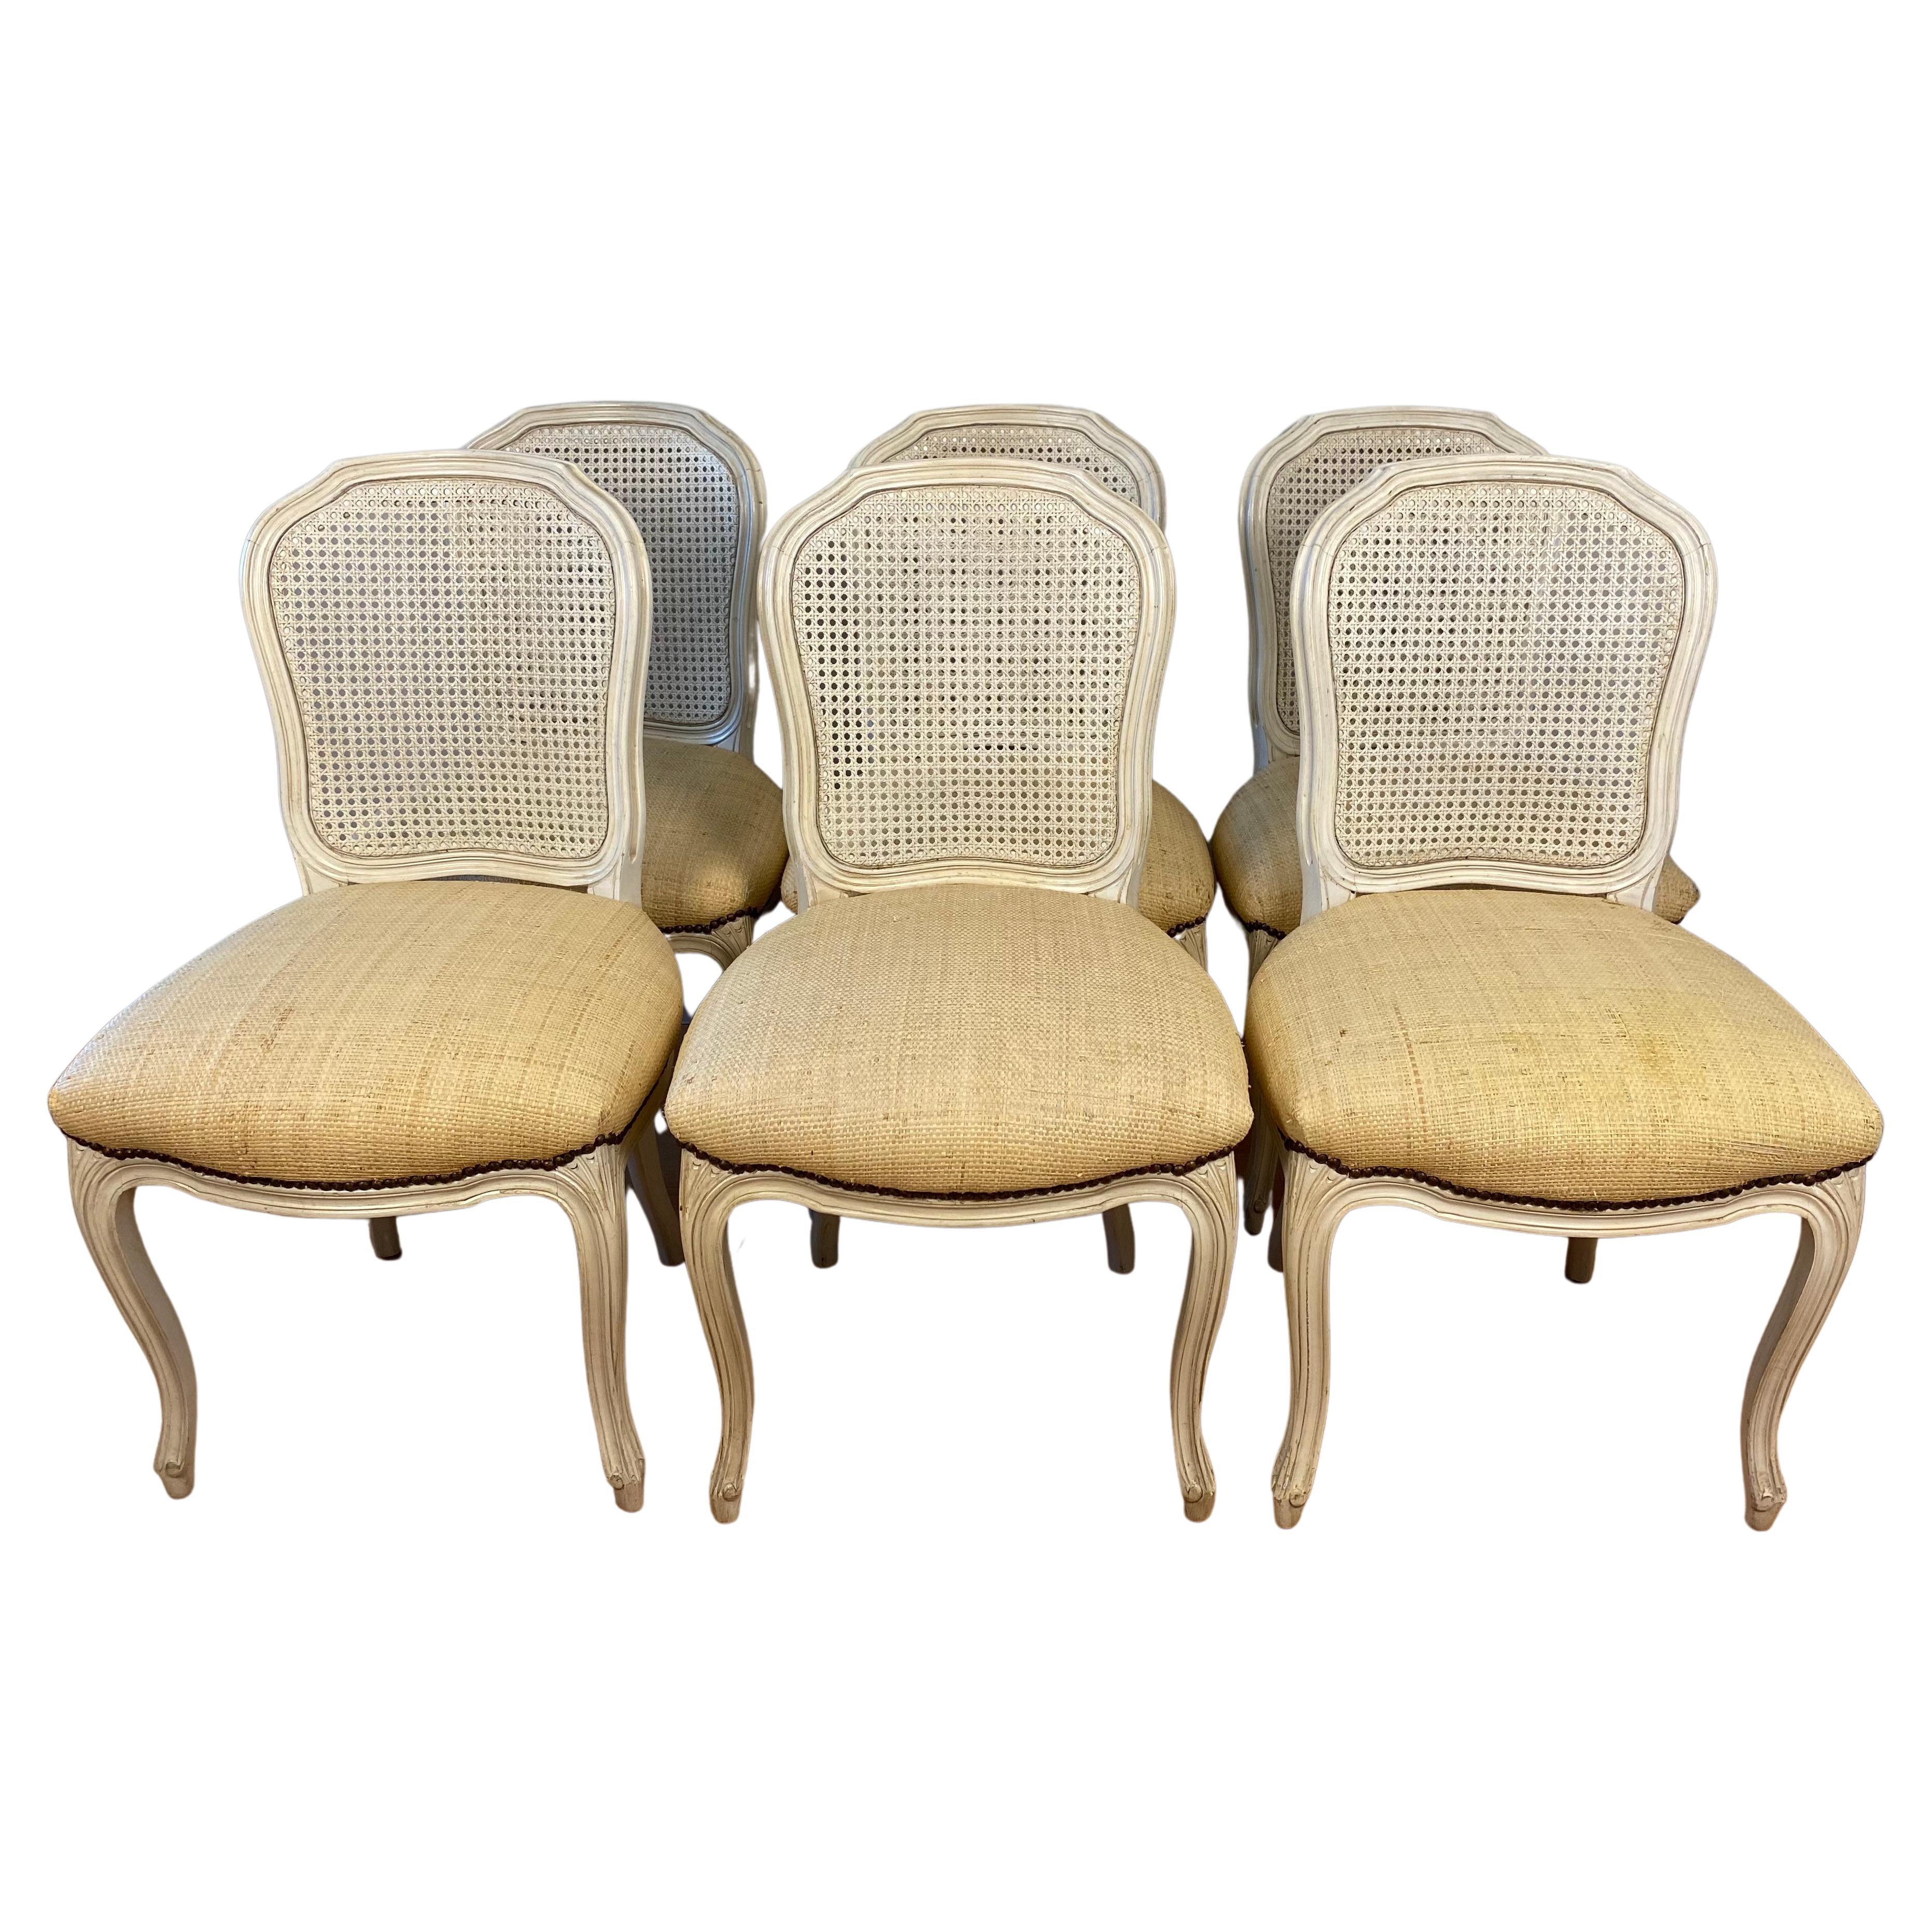 Set of 6 Caned Painted French Louis XV Style Dining Chairs